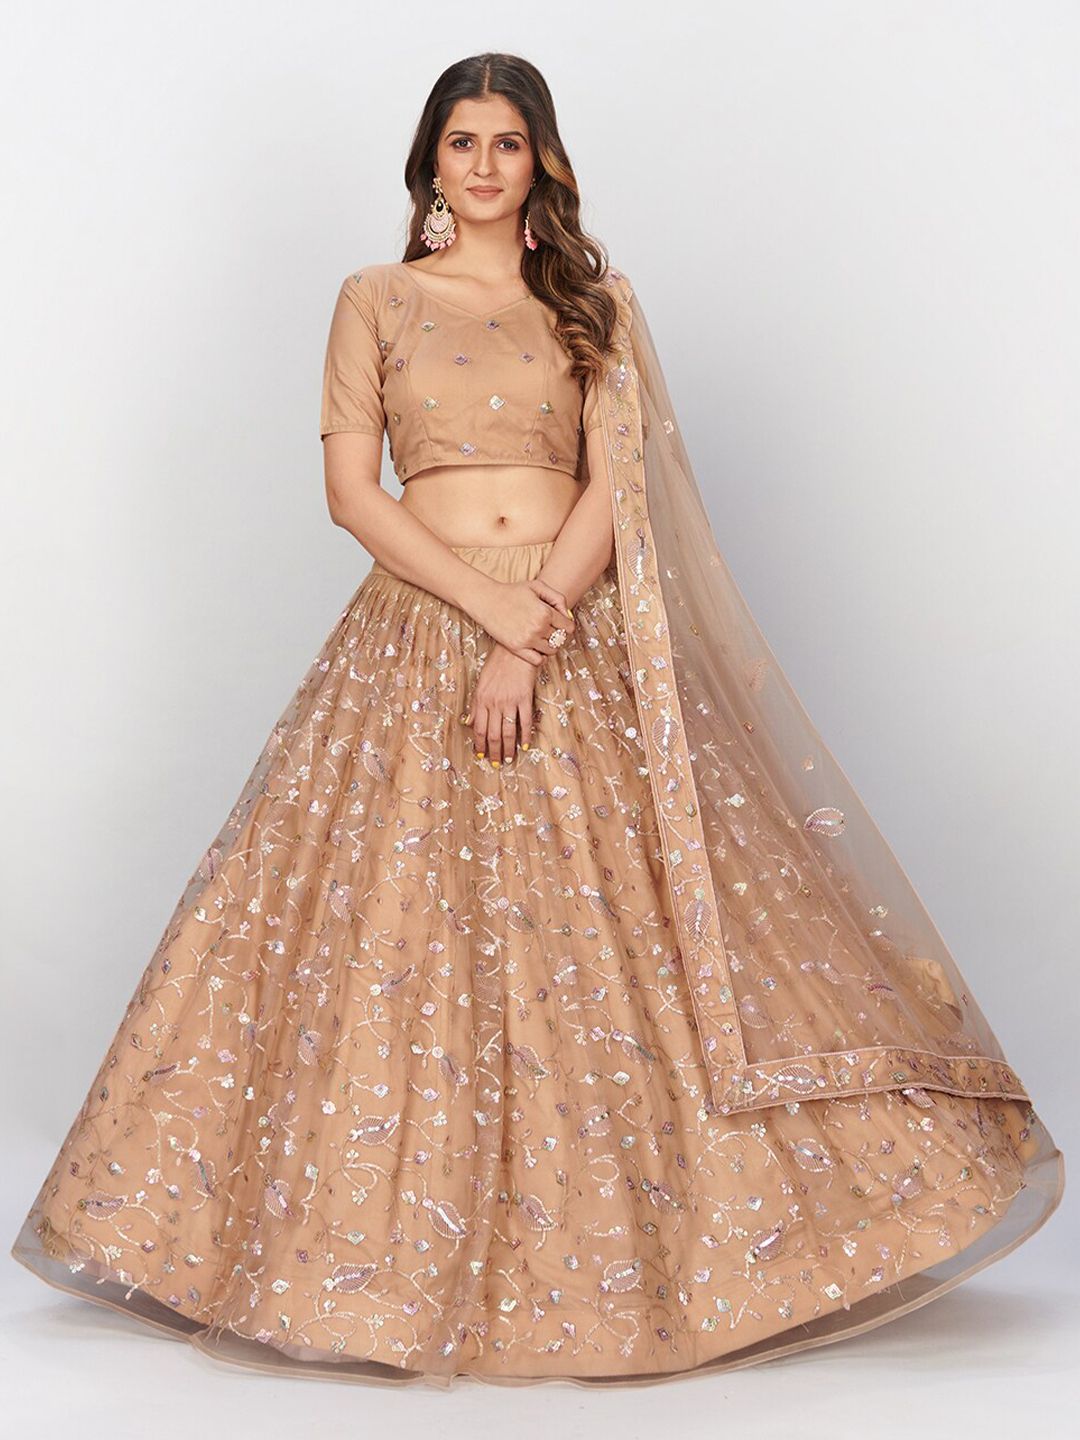 SHOPGARB Beige & Silver-Toned Embellished Sequinned Semi-Stitched Lehenga & Unstitched Blouse With Dupatta Price in India